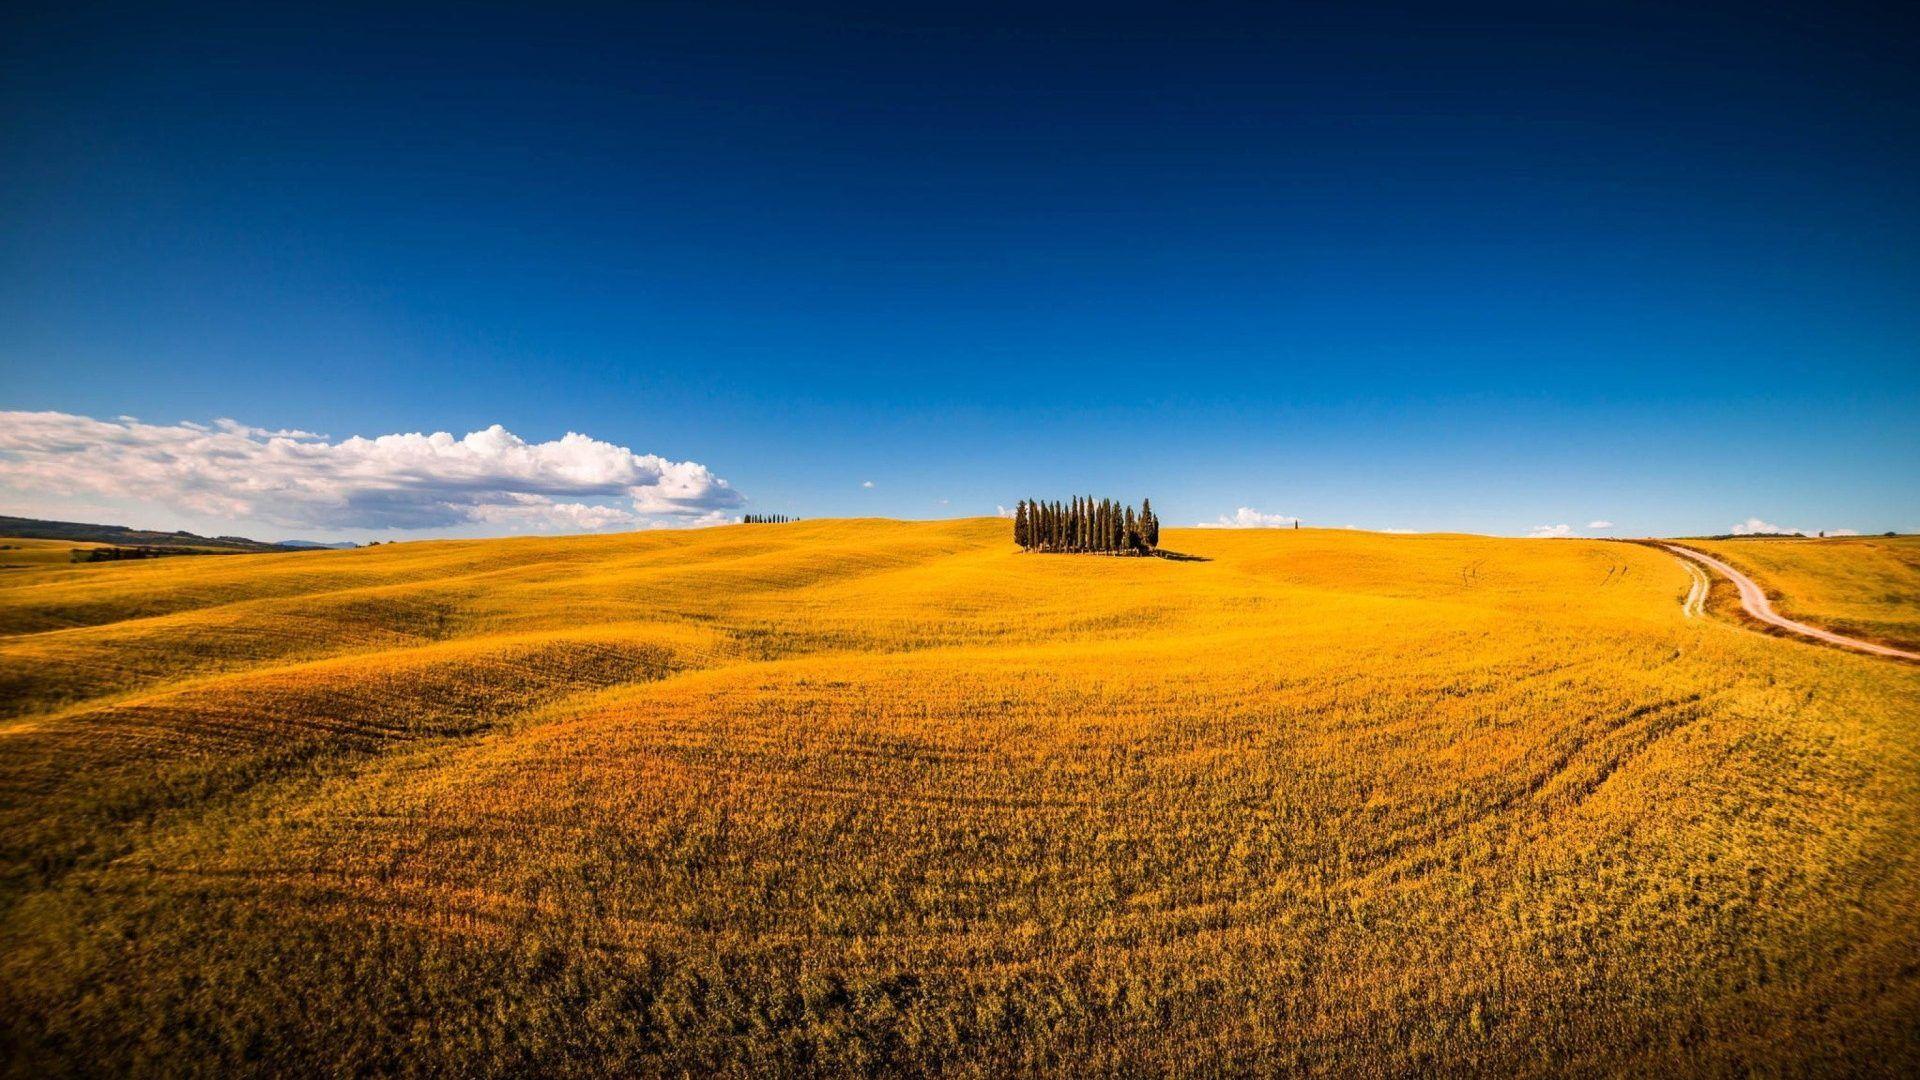 Wallpaper Tagged With Motalcino: Sky Hills Montalcino Tuscany